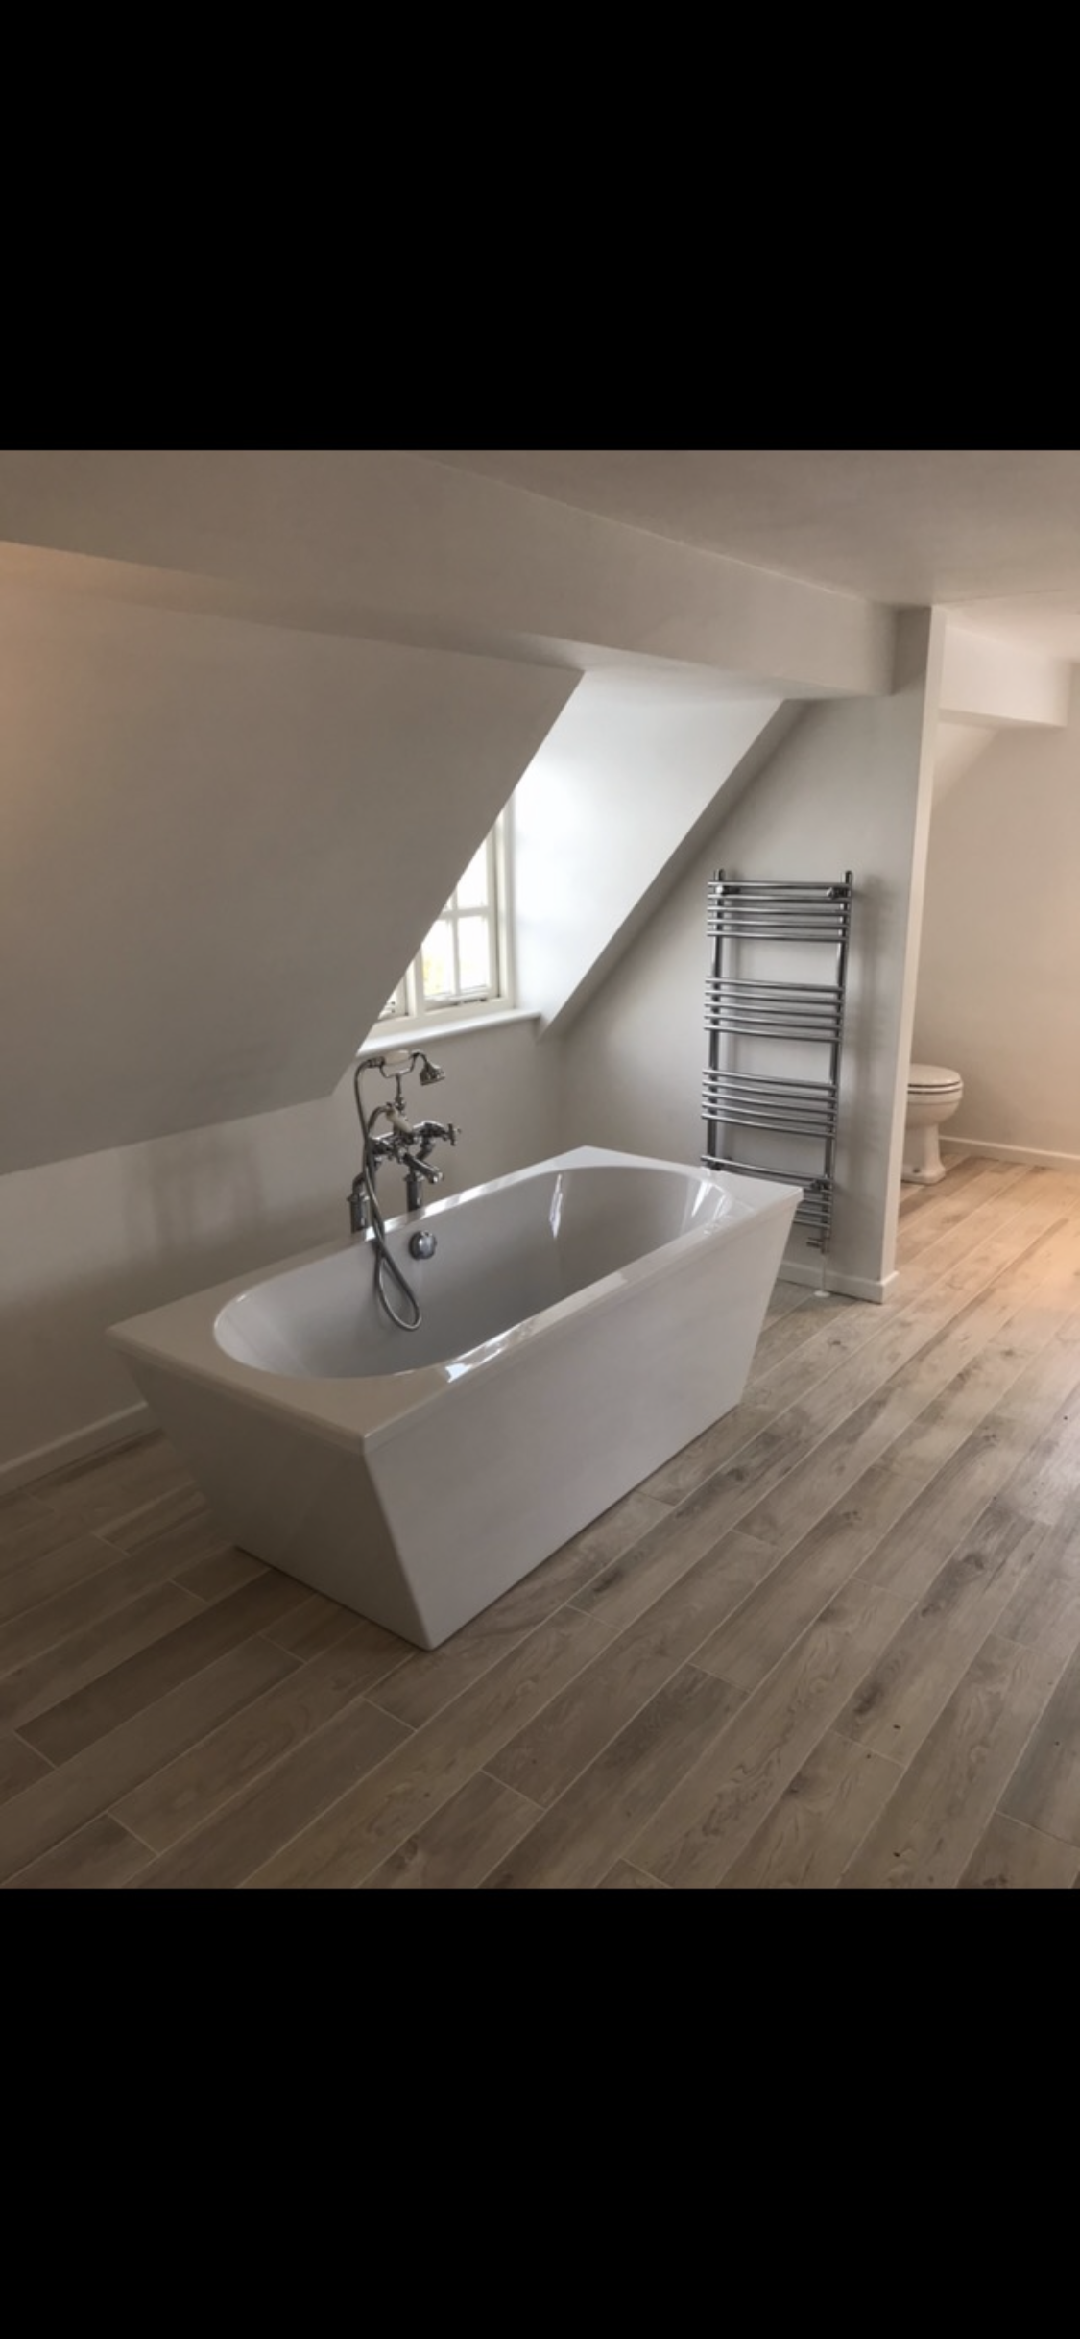 Previous project featuring free standing bath and heated towel rail